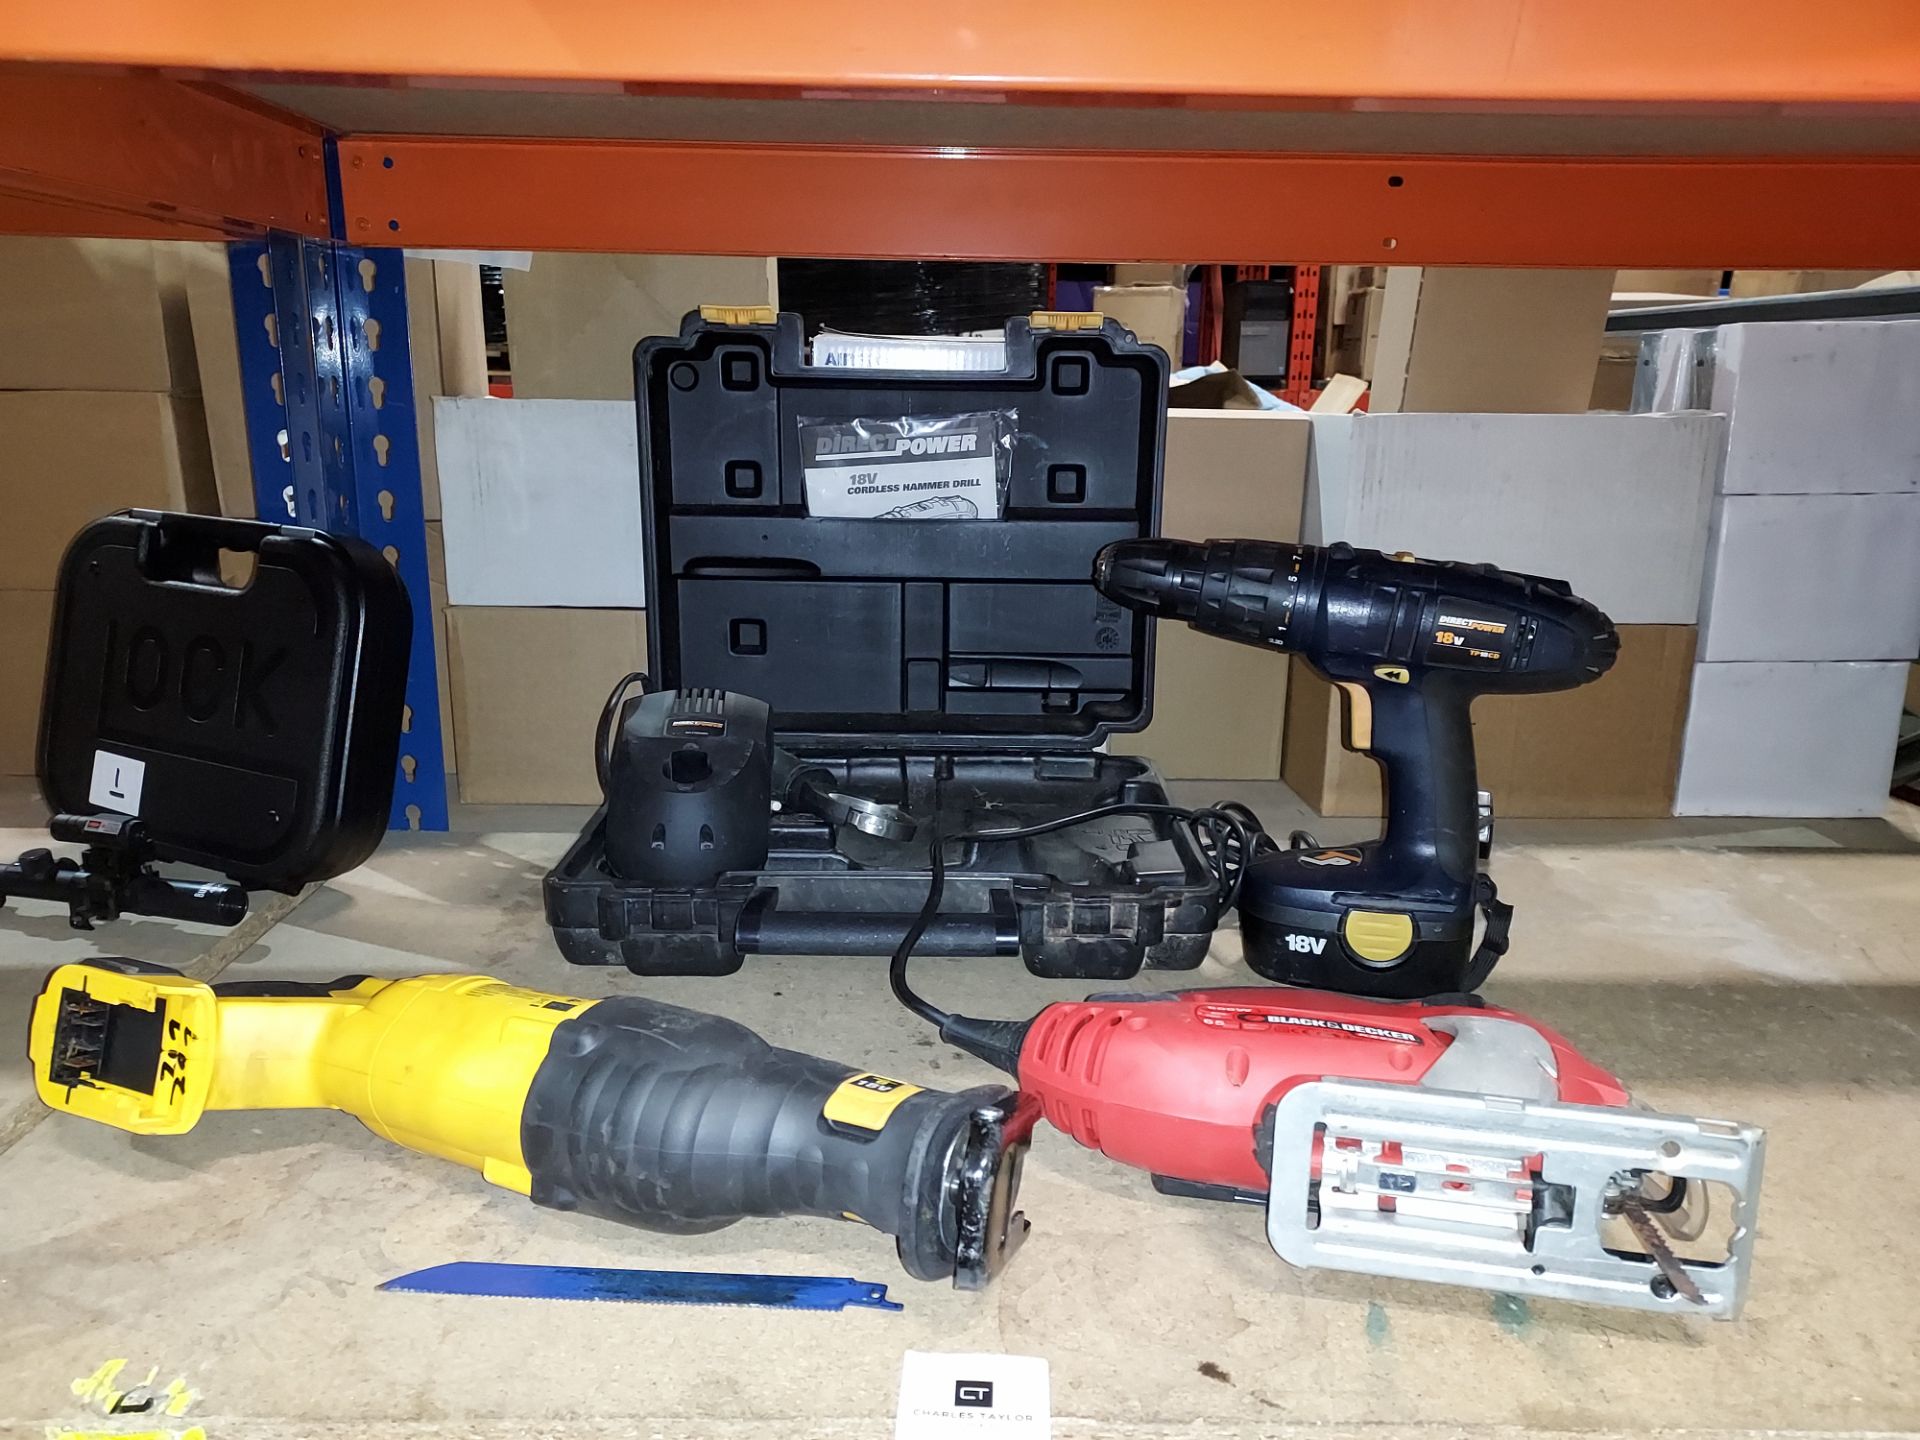 3 PIECE MIXED LOT TO INCLUDE DEWALT RIPSAW, BLACK & DECKER JIGSAW AND DIRECT POWER CORDLESS DRILL